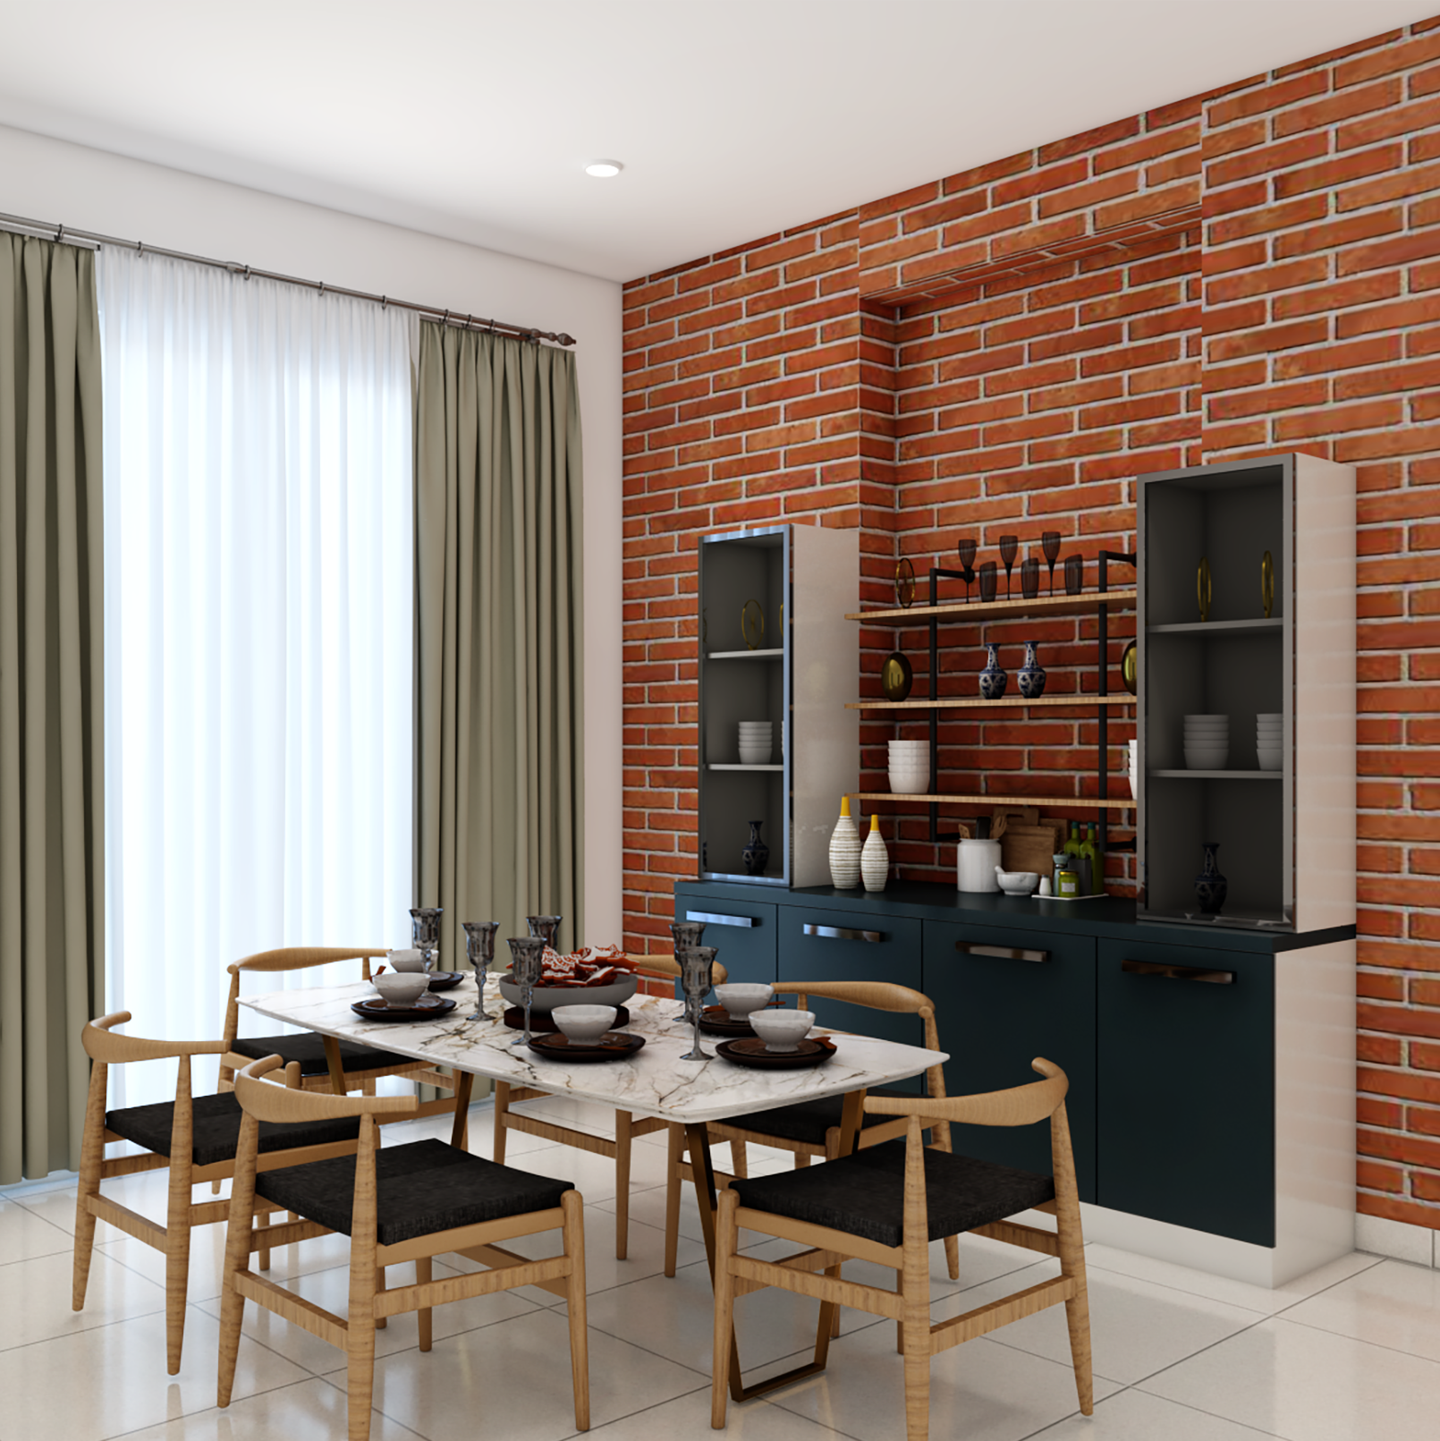 Unique Six-Seater Dining Room With Brick Themed Wall - Livspace